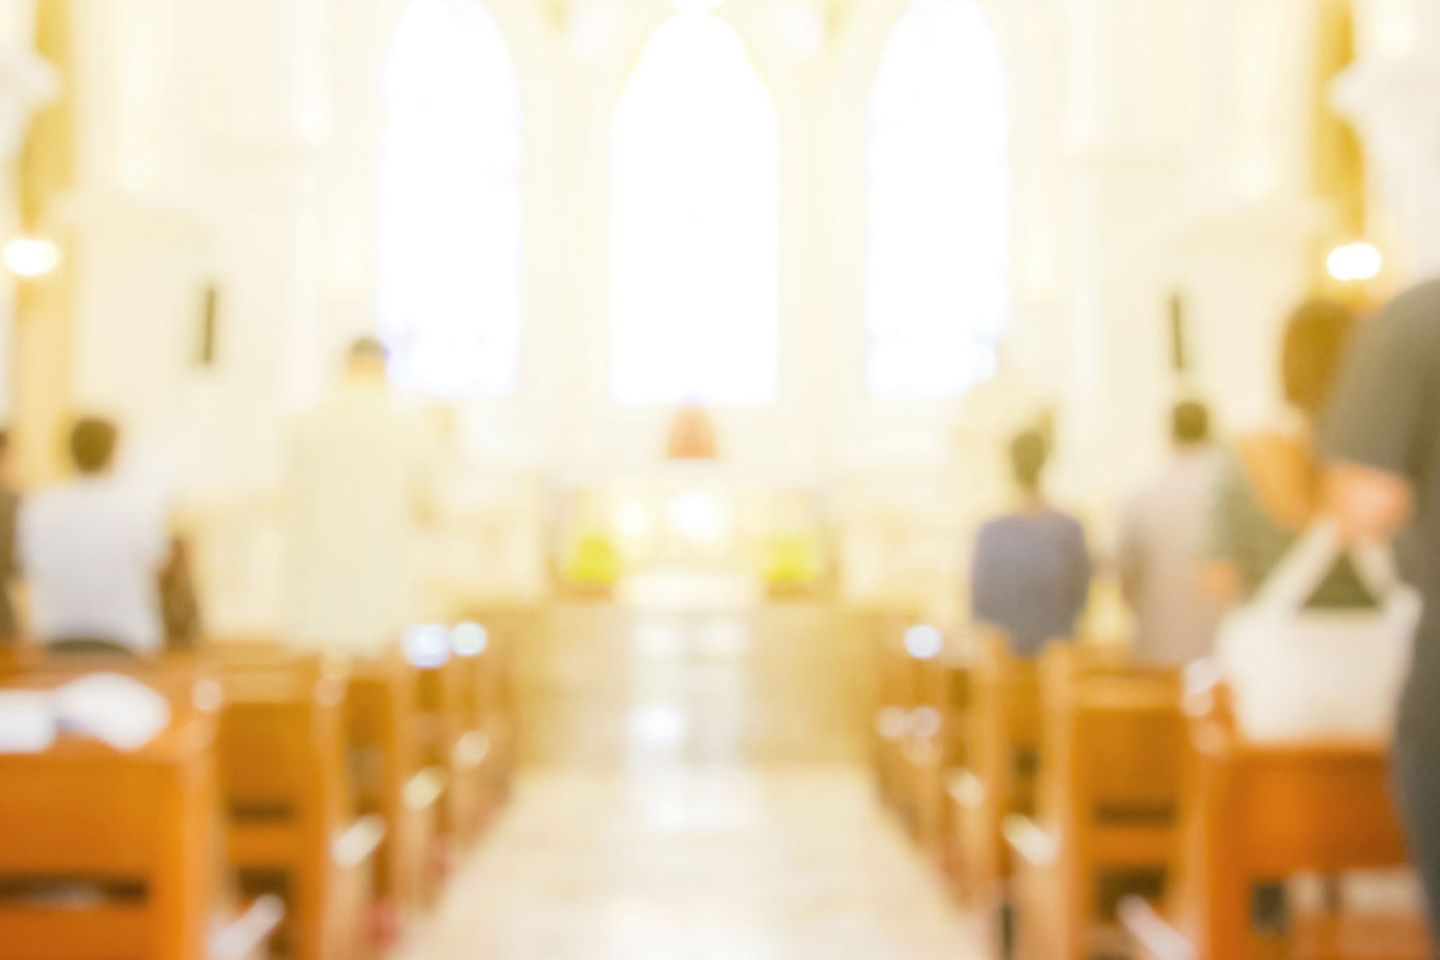 Blurred image of Christian service